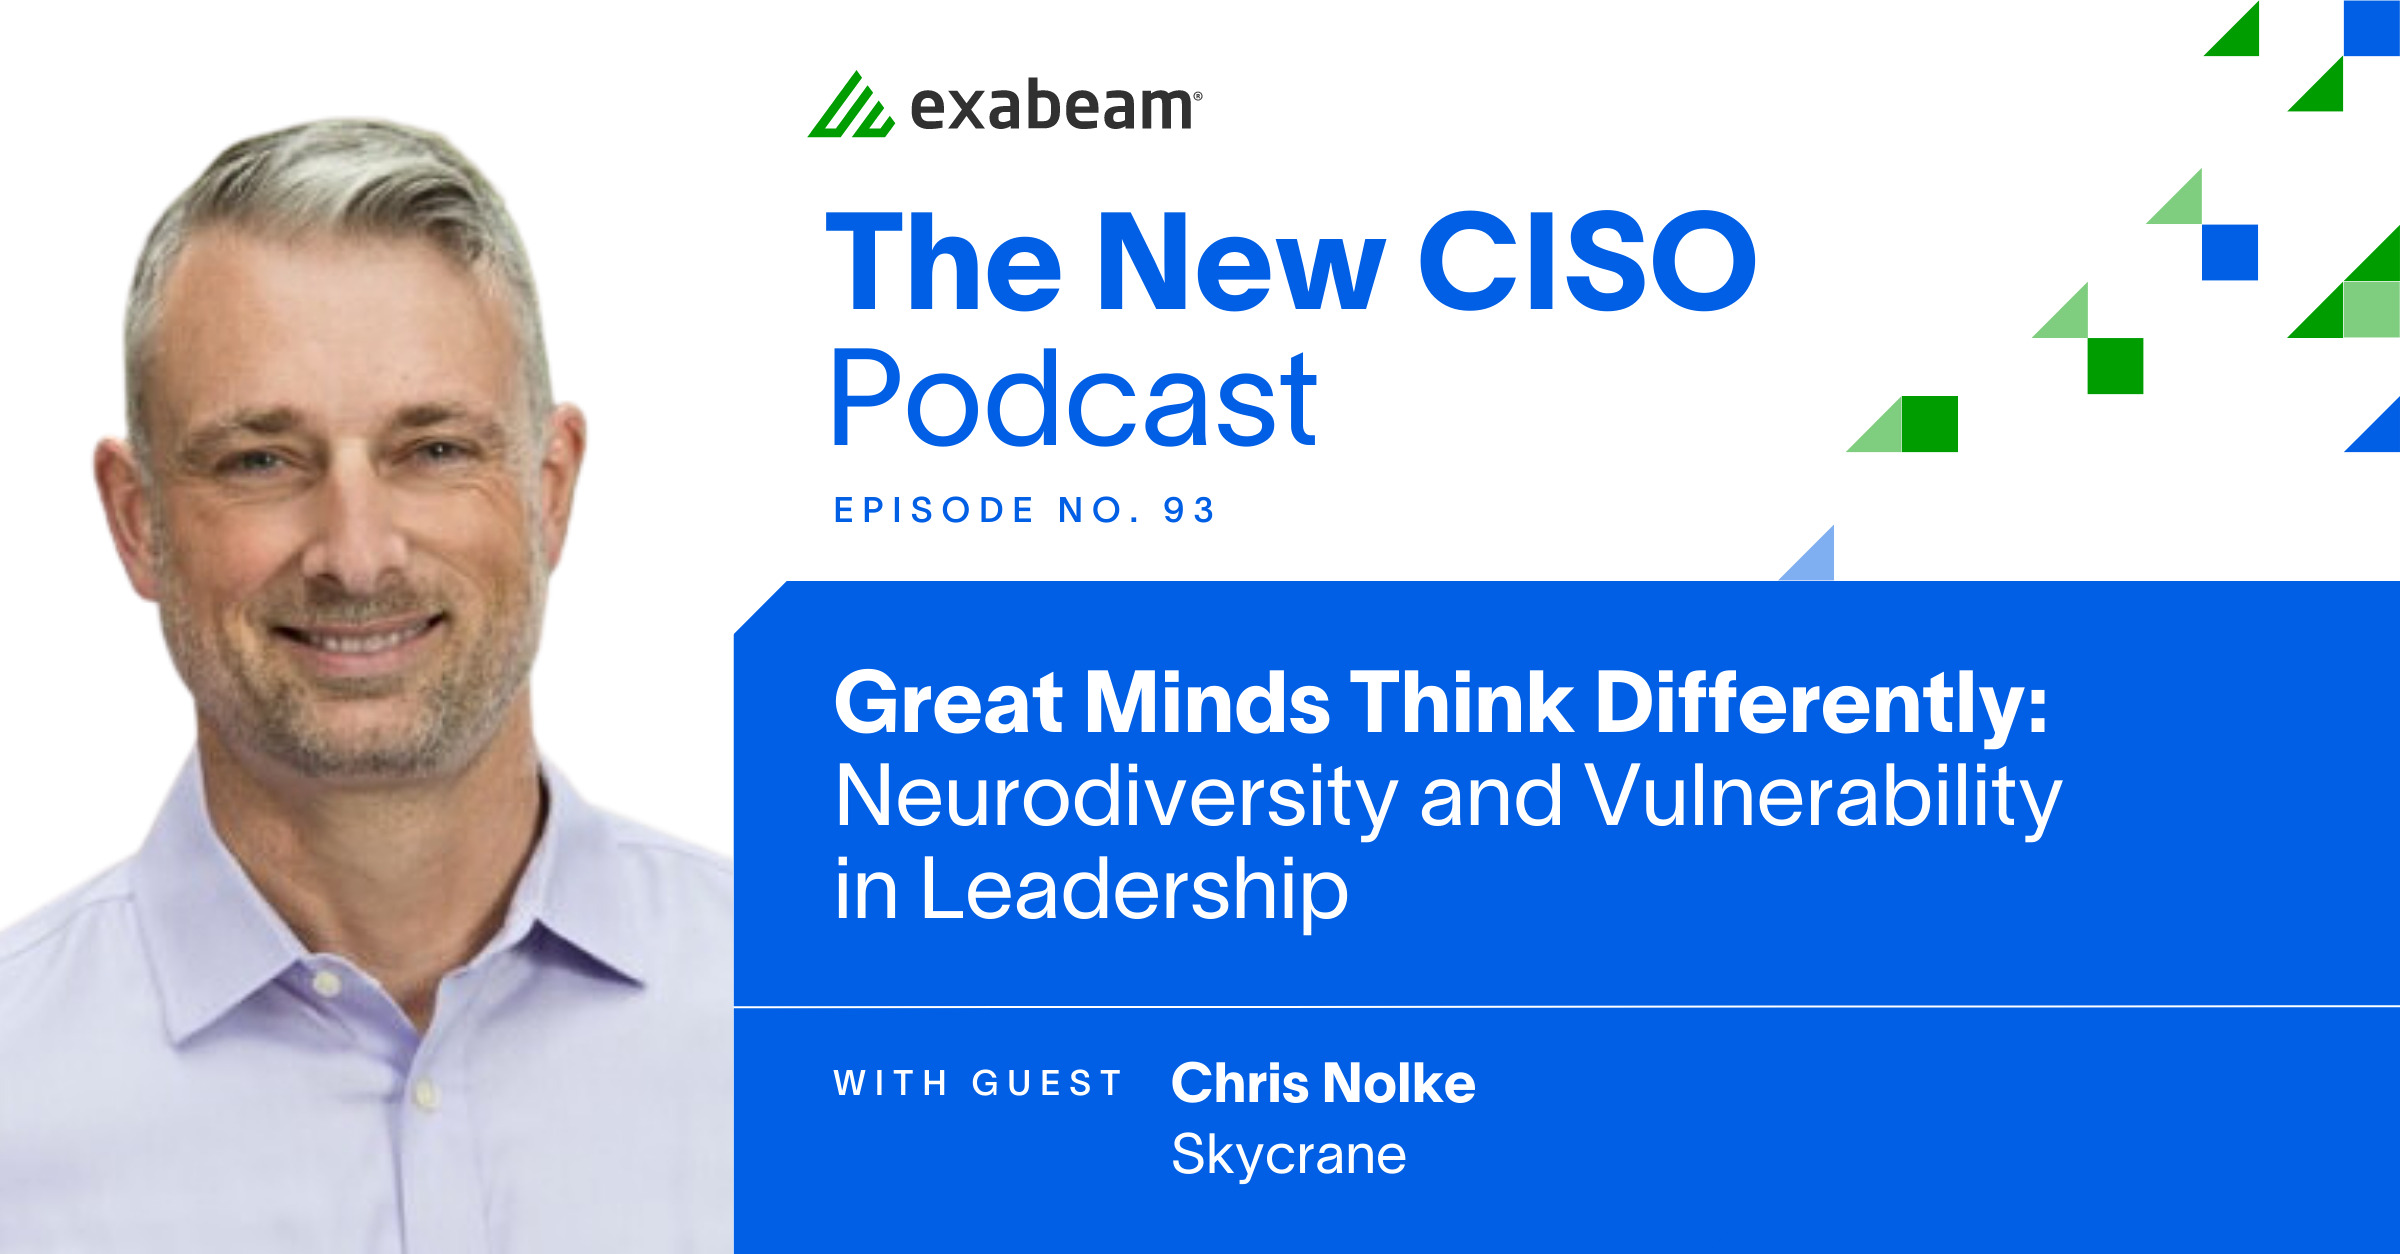 The New CISO Podcast Episode 93: "Great Minds Think Differently: Neurodiversity and Vulnerability in Leadership" with guest Chris Nolke